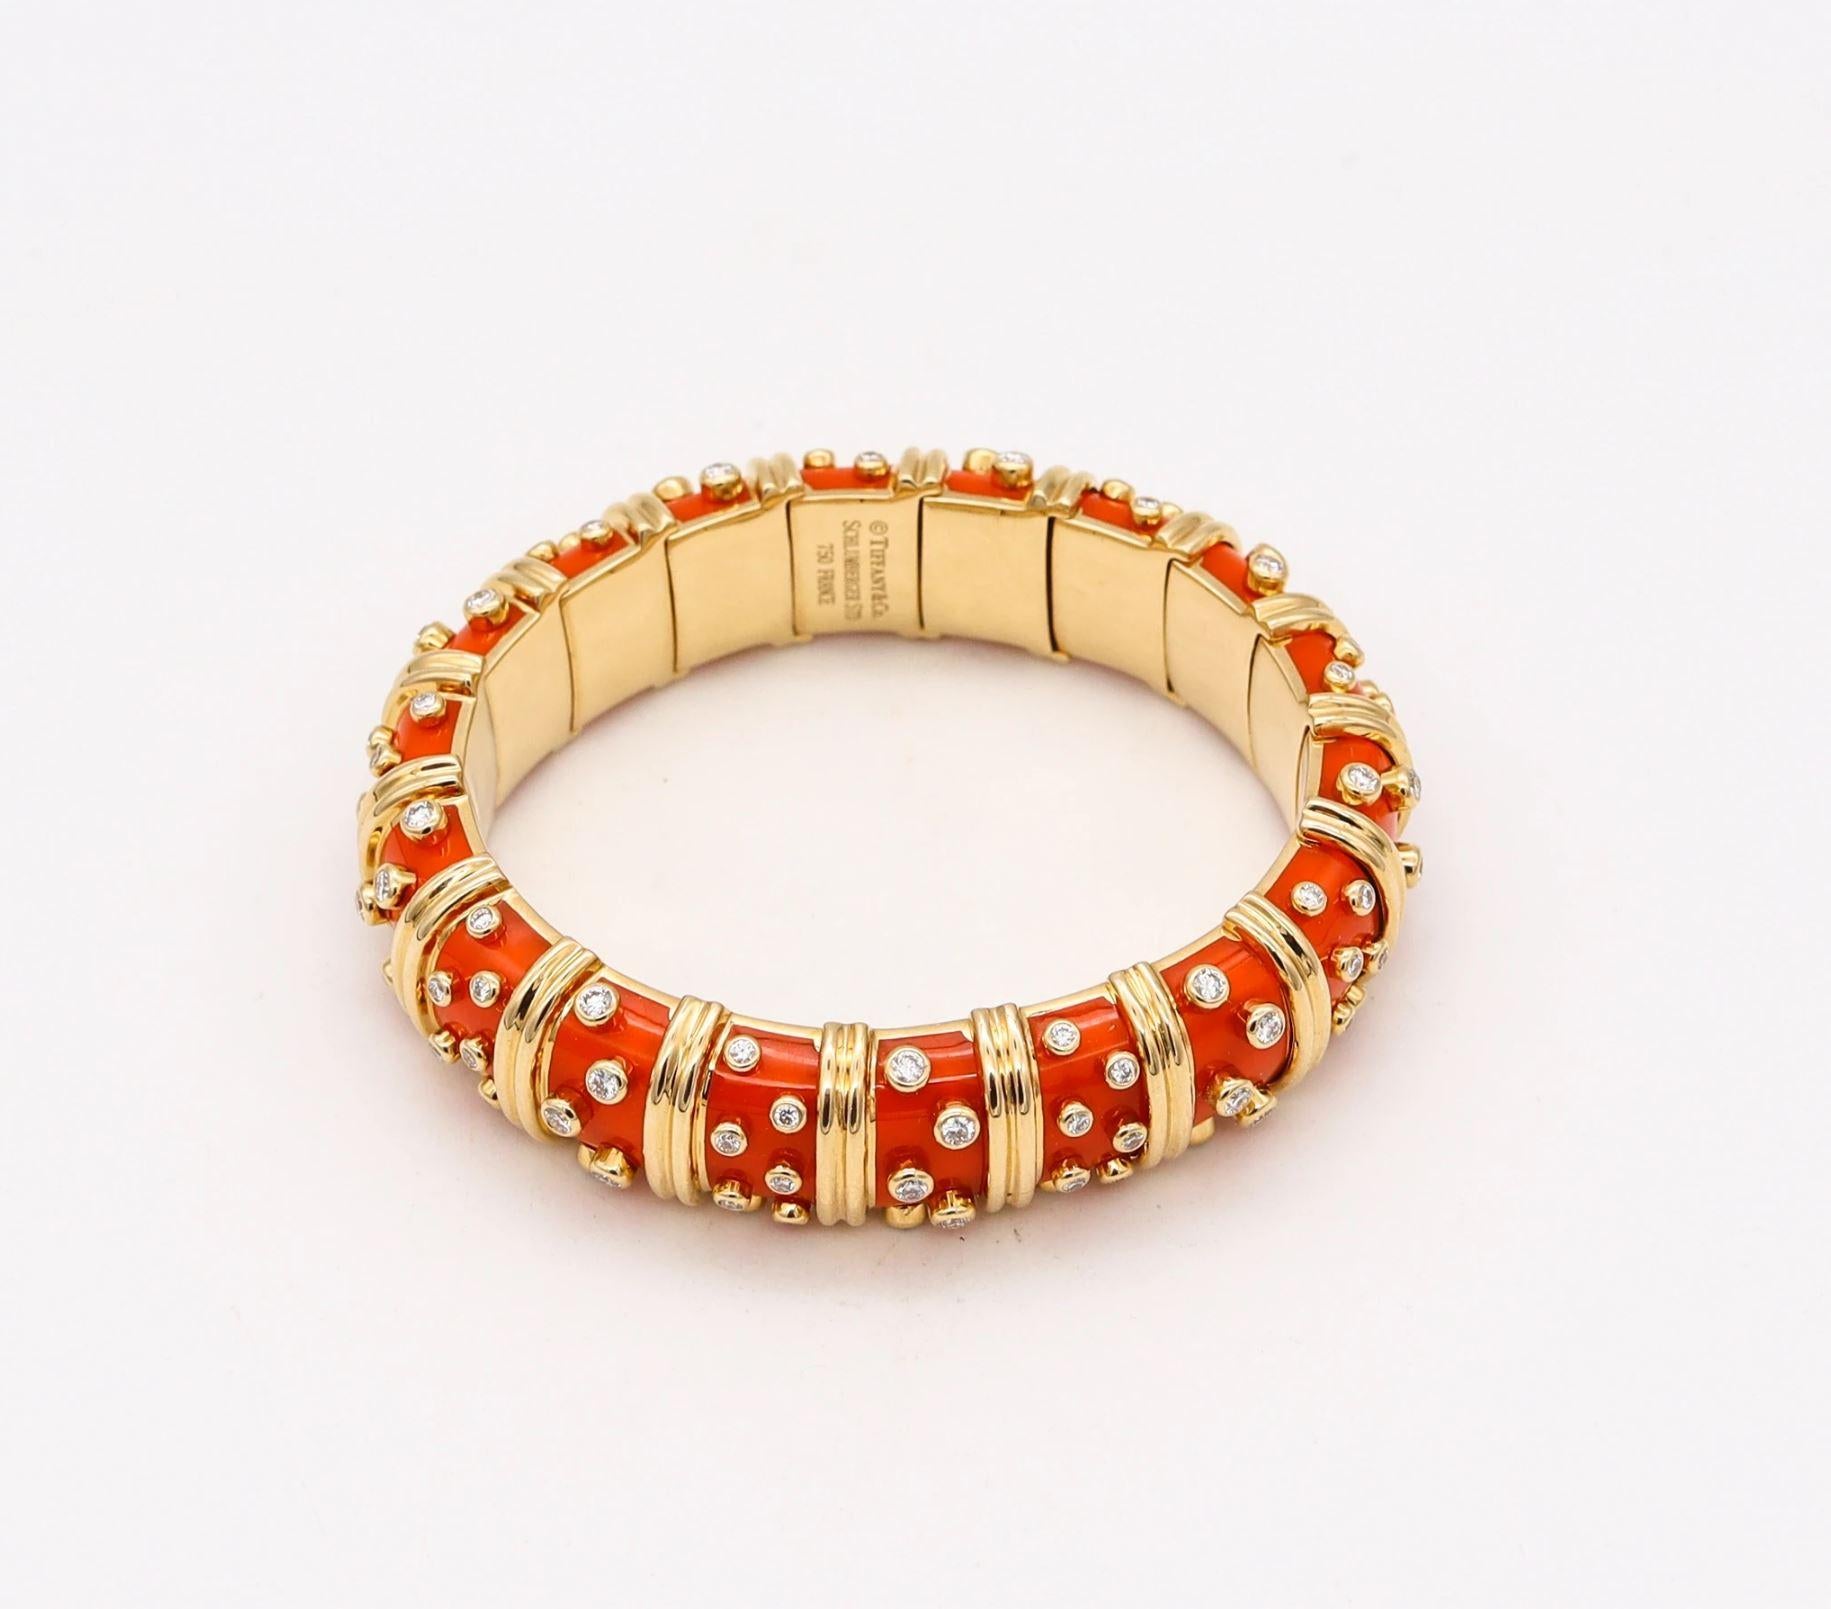 Enamel bracelet designed by Jean Schlumberger for Tiffany & Co.

Beautiful and iconic piece, made in Paris France at the atelier of Schlumberger for the Tiffany studios. Designed as a orangerie paillonné hinged bangle bracelet, crafted with